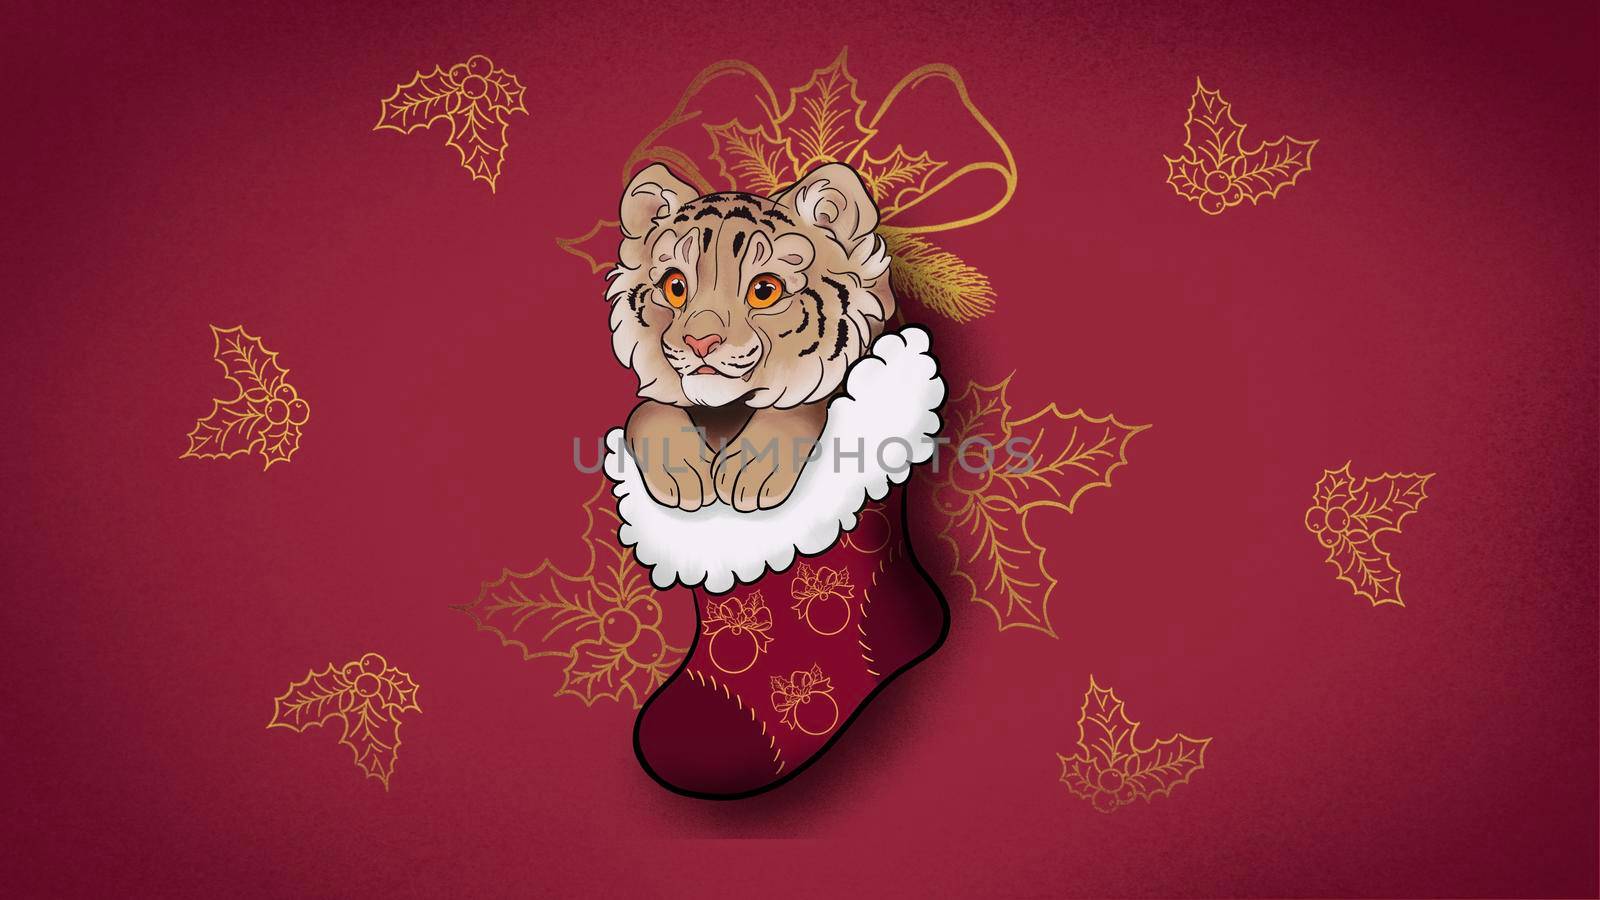 new year wallpaper with red background with golden tiger elements by kr0k0